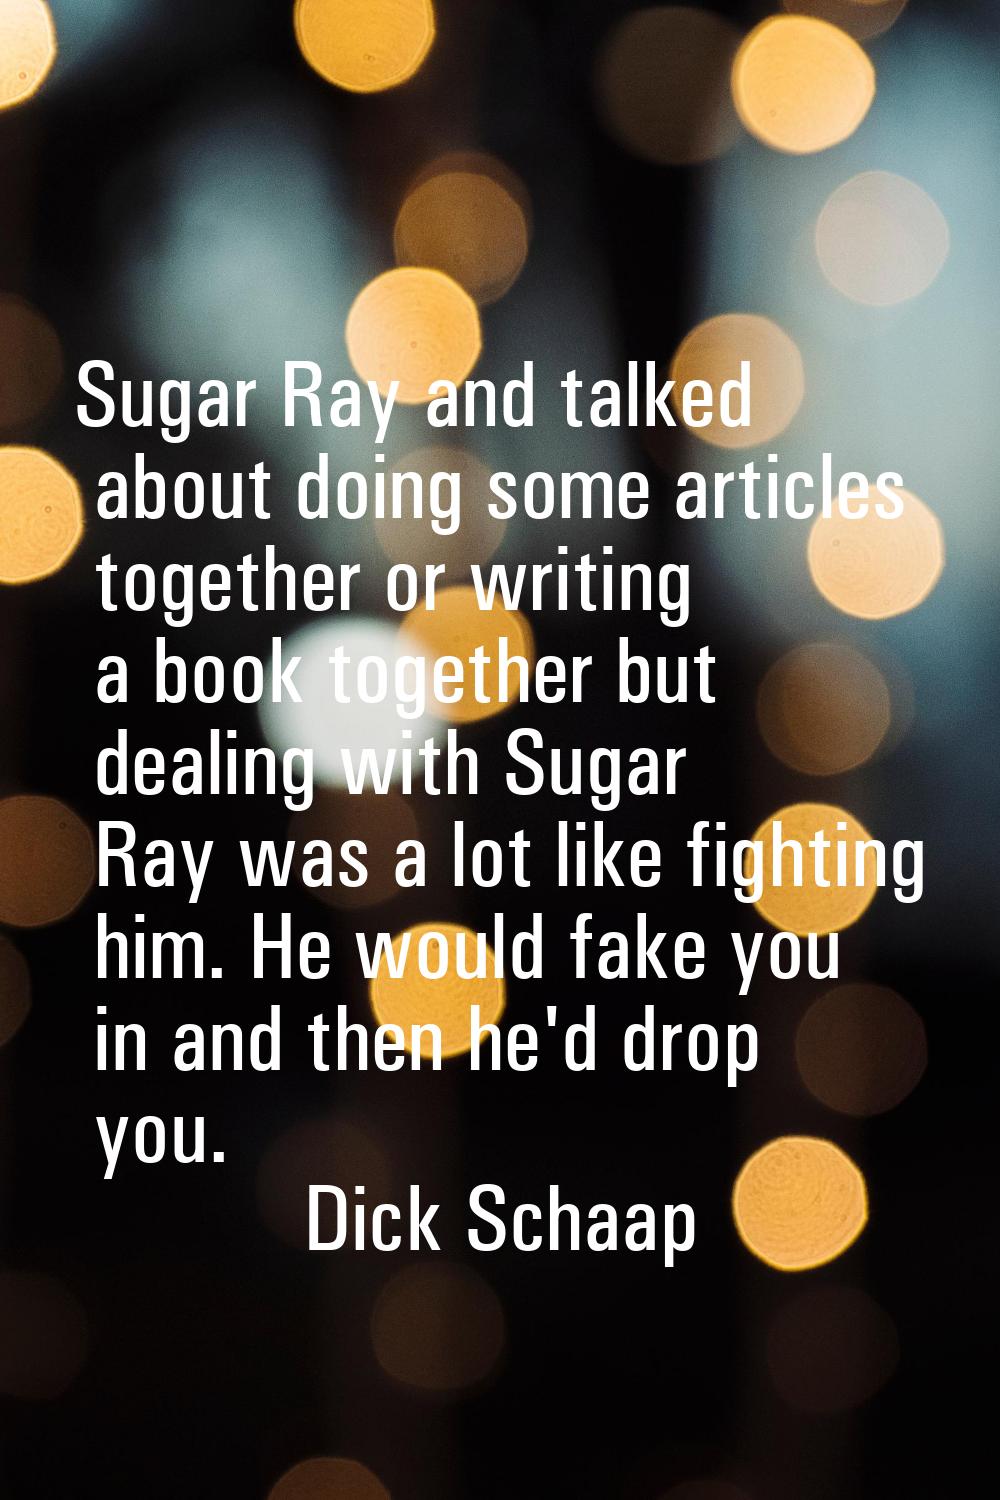 Sugar Ray and talked about doing some articles together or writing a book together but dealing with